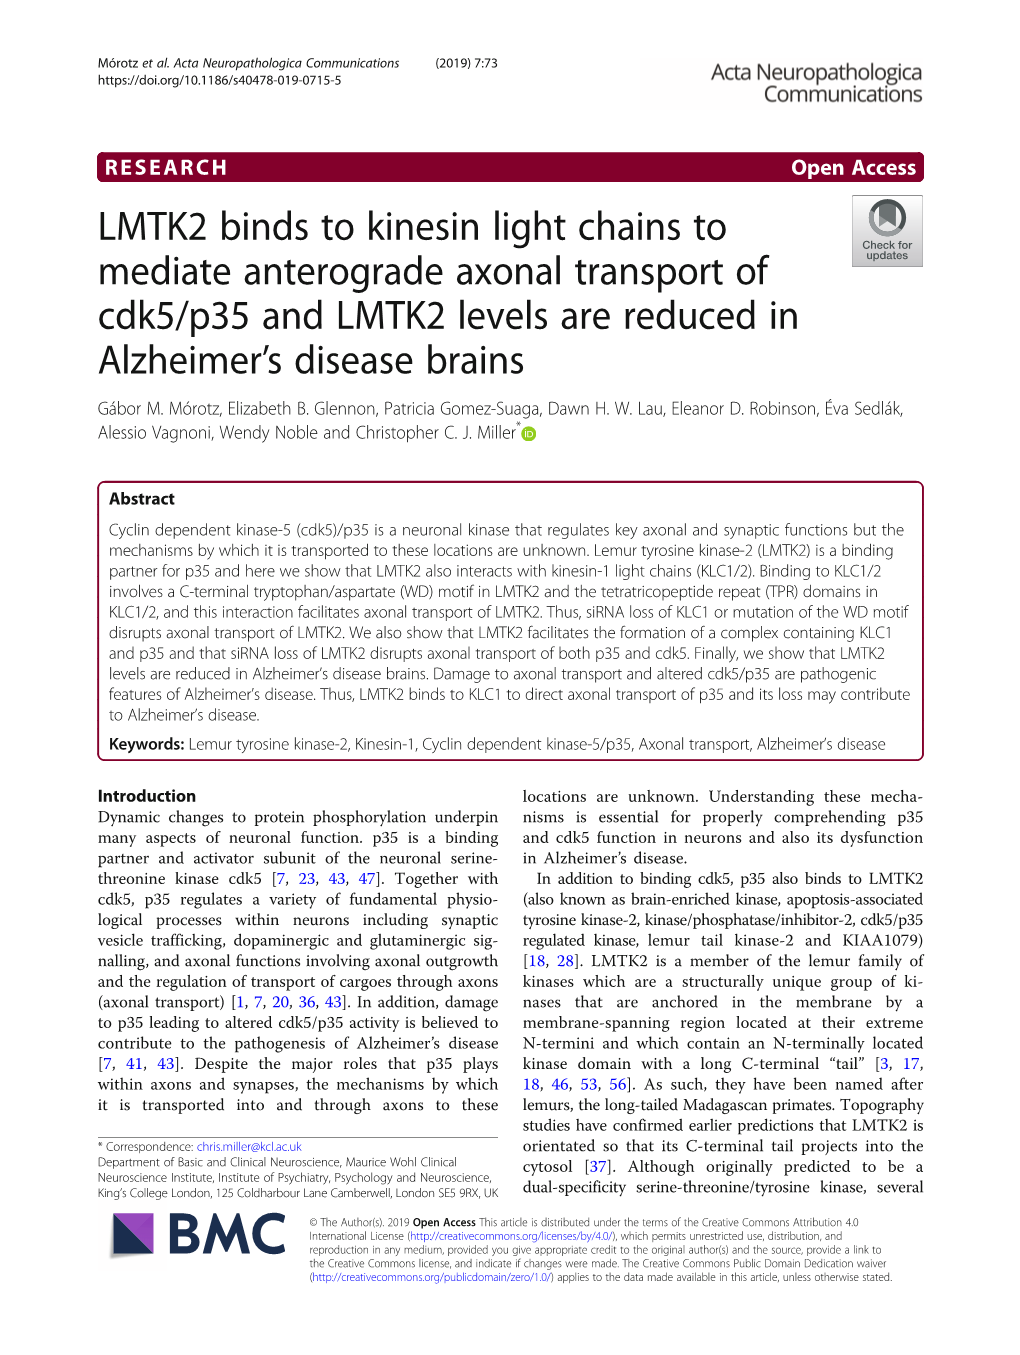 LMTK2 Binds to Kinesin Light Chains to Mediate Anterograde Axonal Transport of Cdk5/P35 and LMTK2 Levels Are Reduced in Alzheimer’S Disease Brains Gábor M